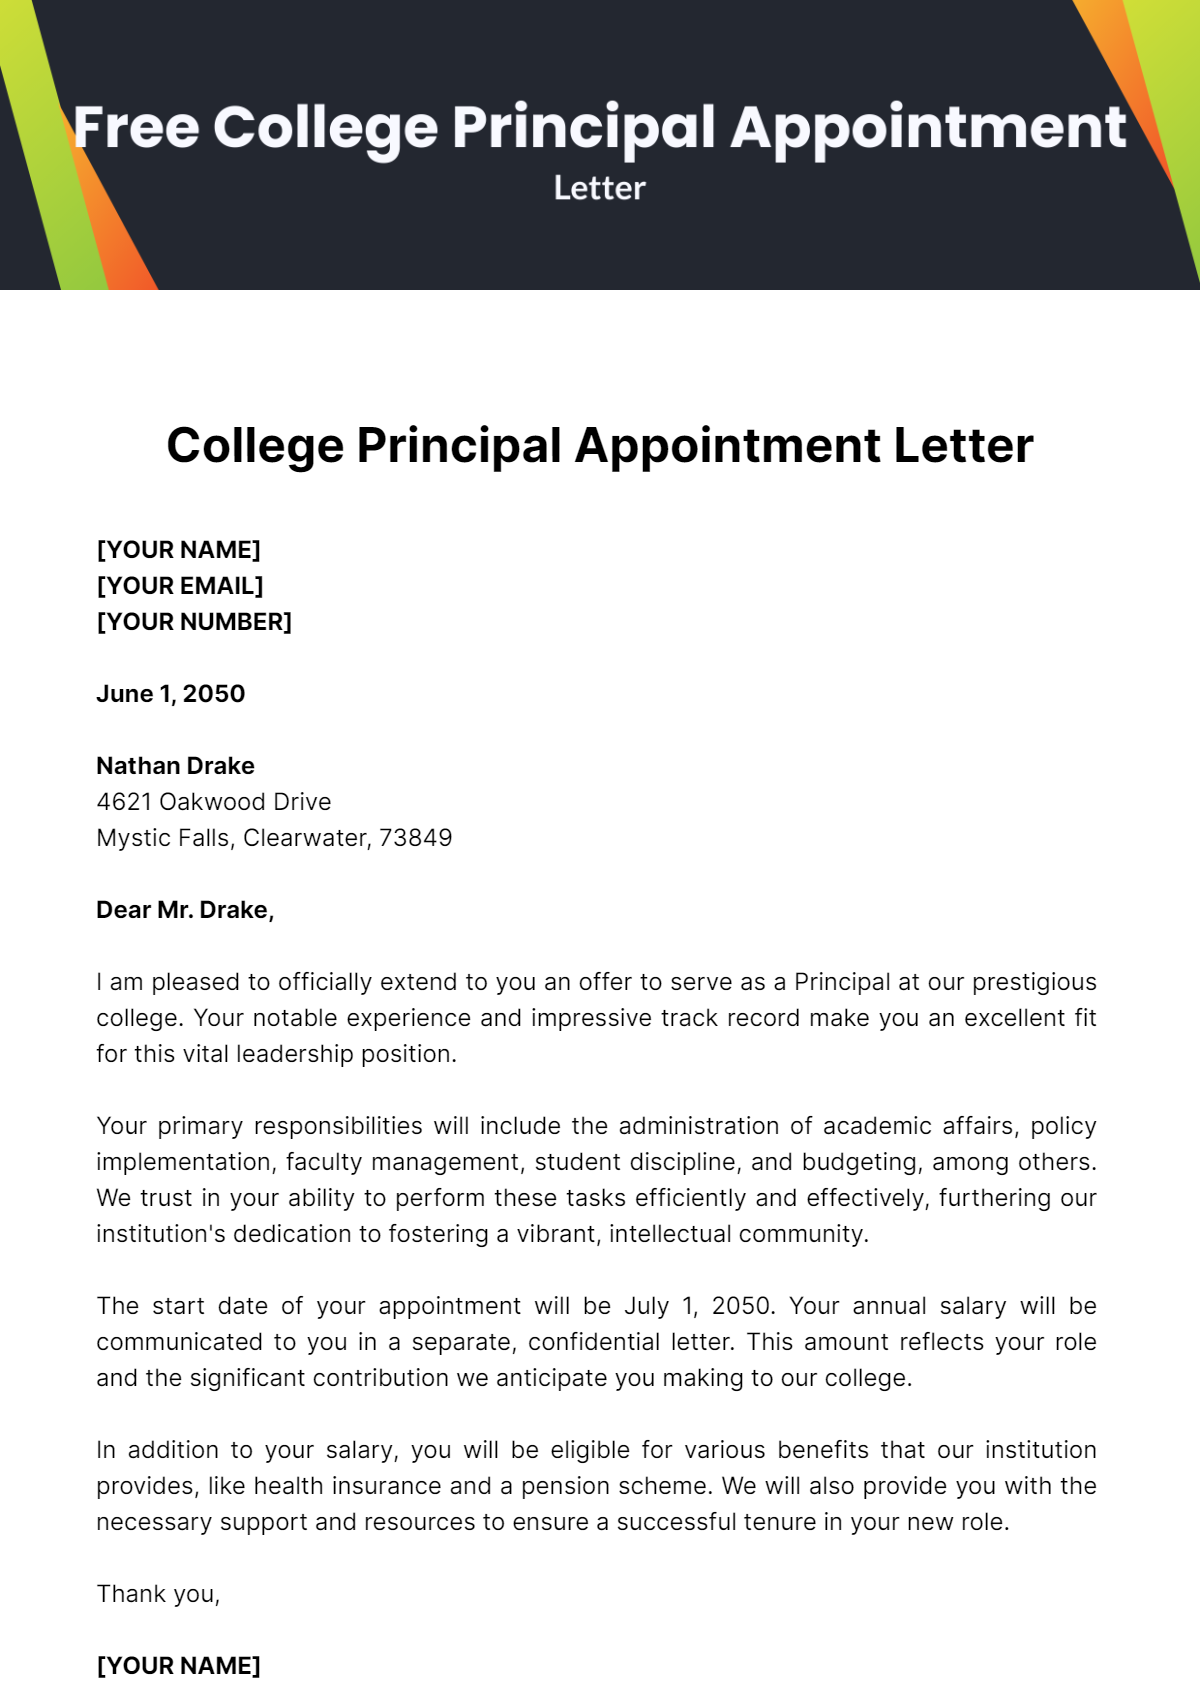 Free College Principal Appointment Letter Template